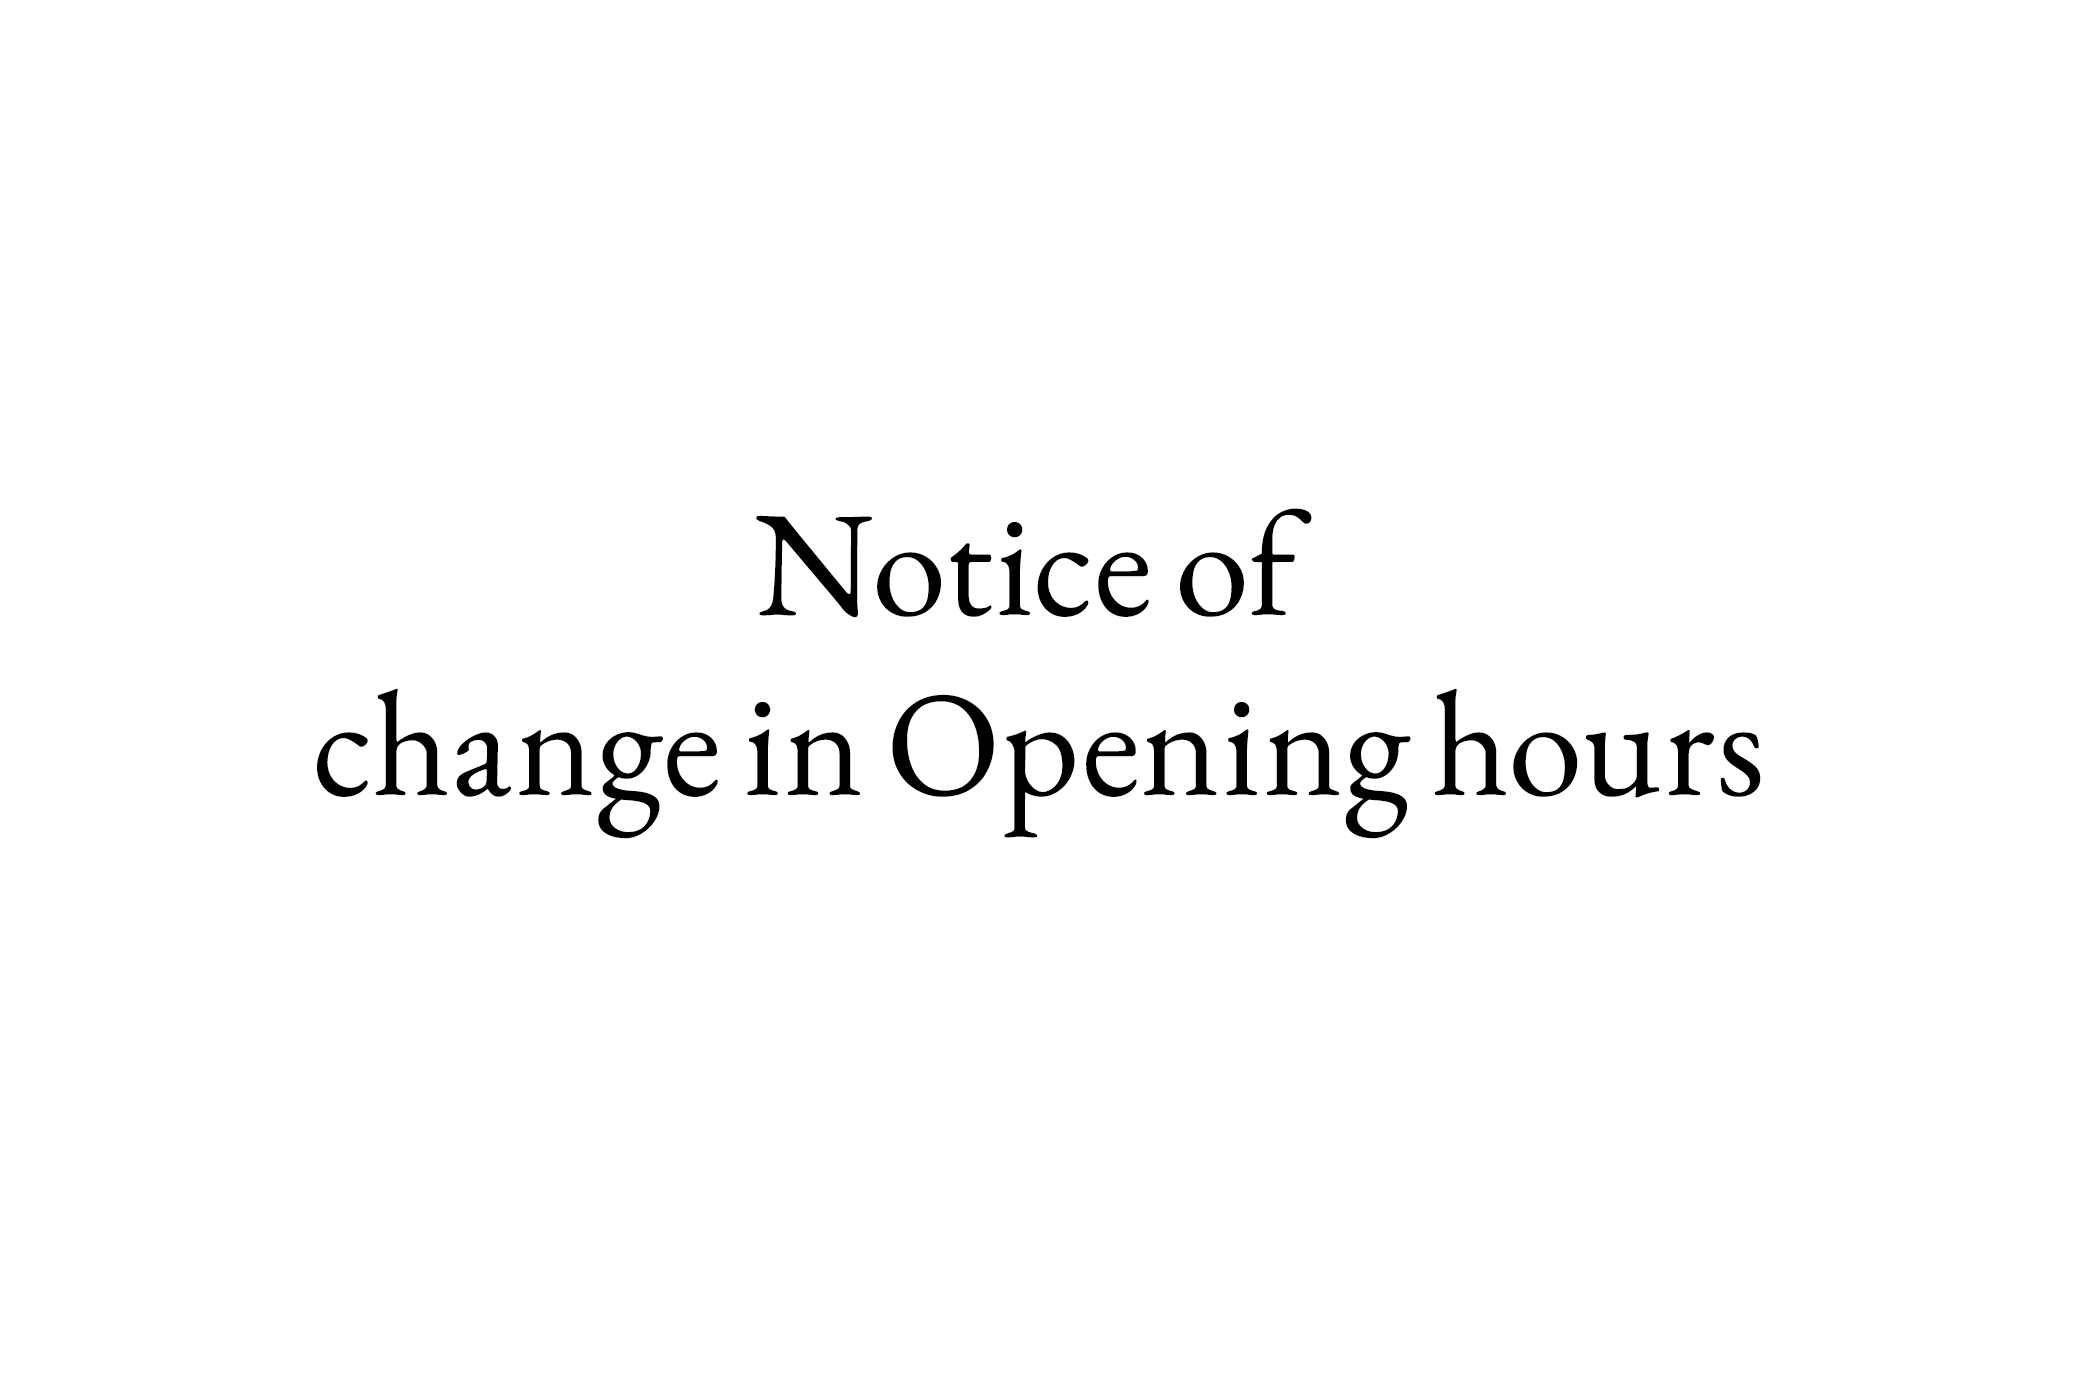 “Opening hours